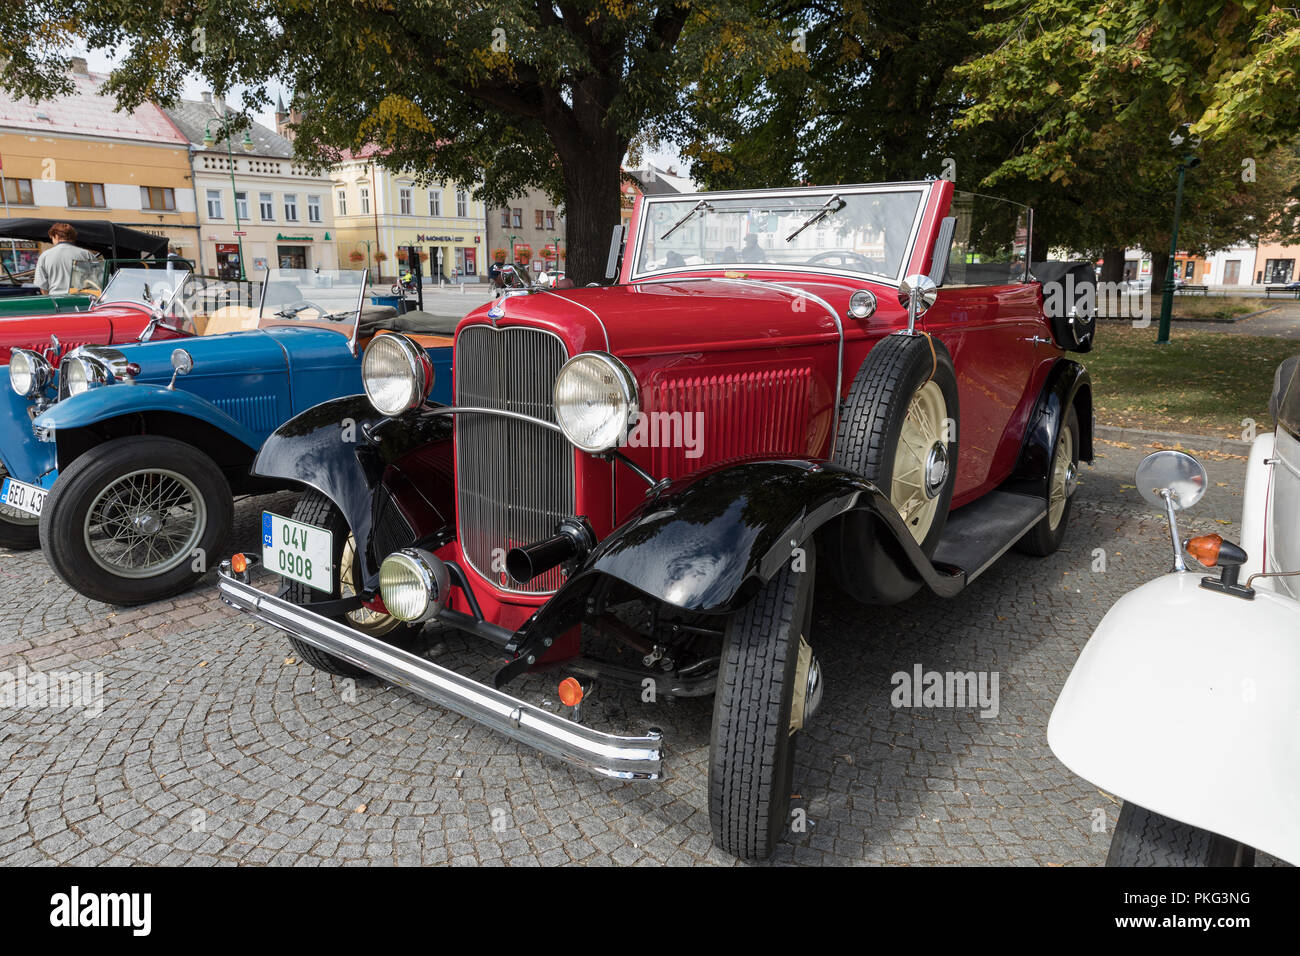 Praga Piccolo High Resolution Stock Photography and Images - Alamy